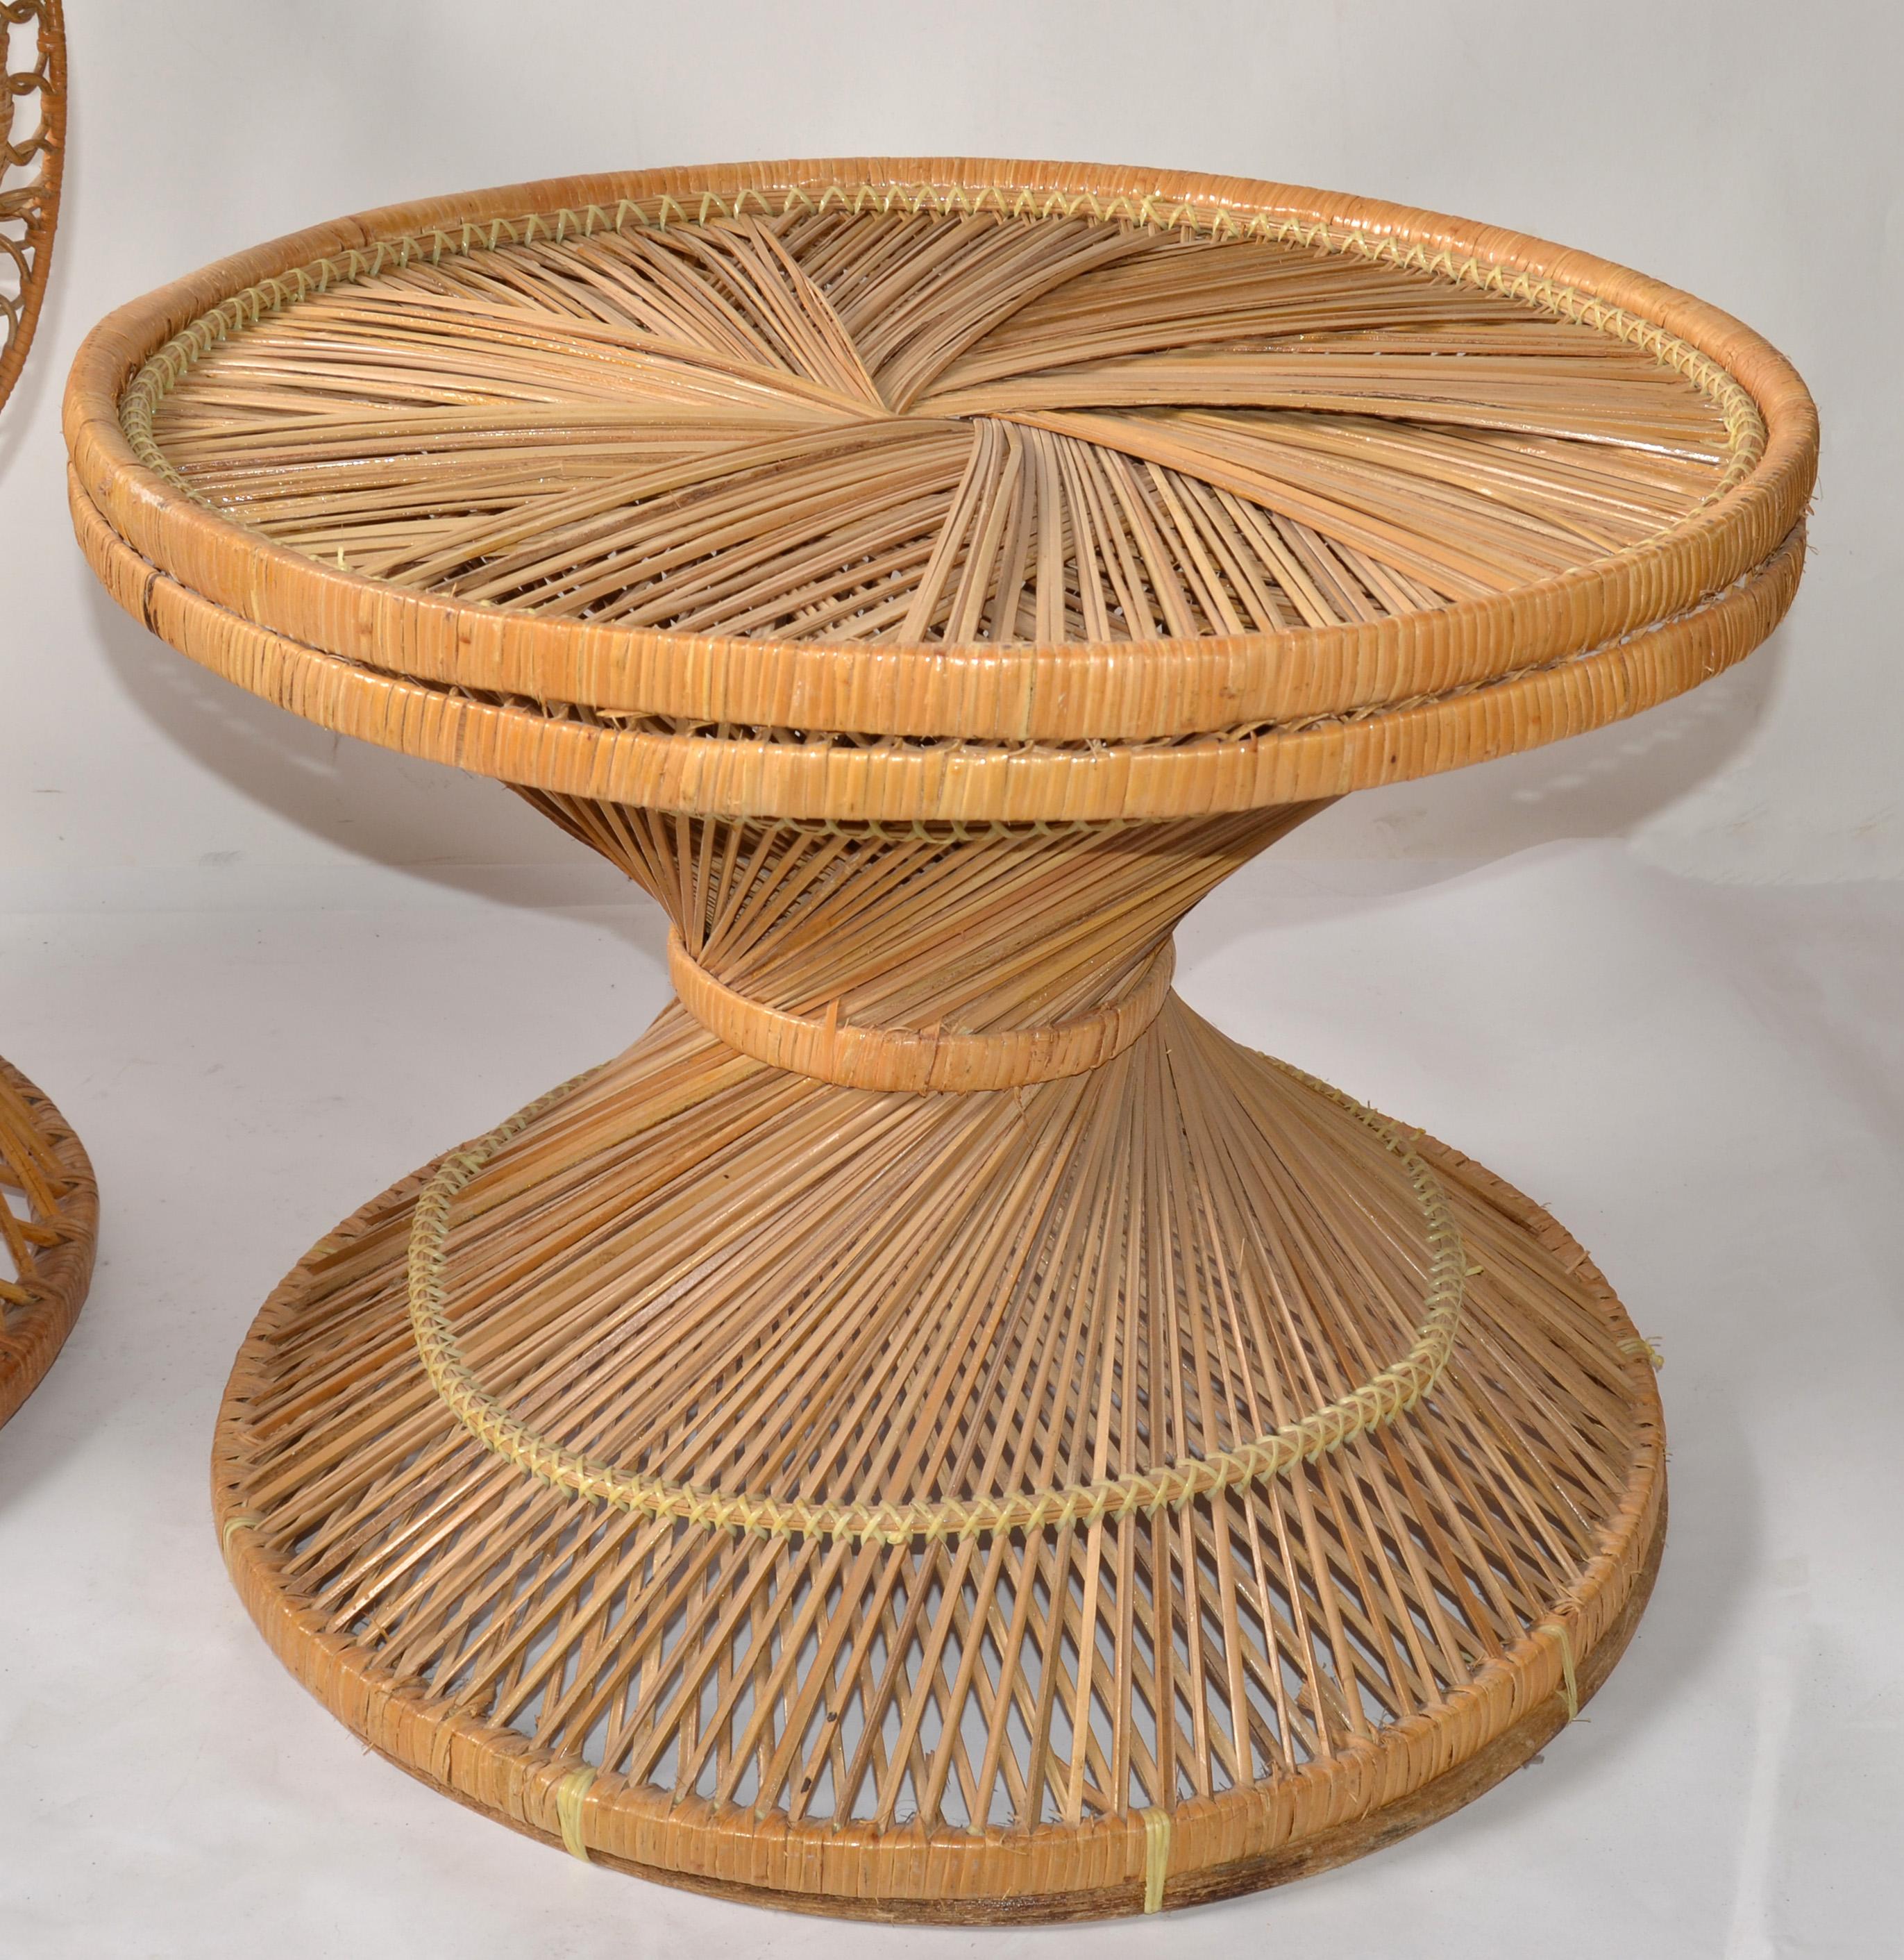 Coastal Vintage Round Rattan Accent Table Hand-Woven Wicker Caning Peacock Chair For Sale 2